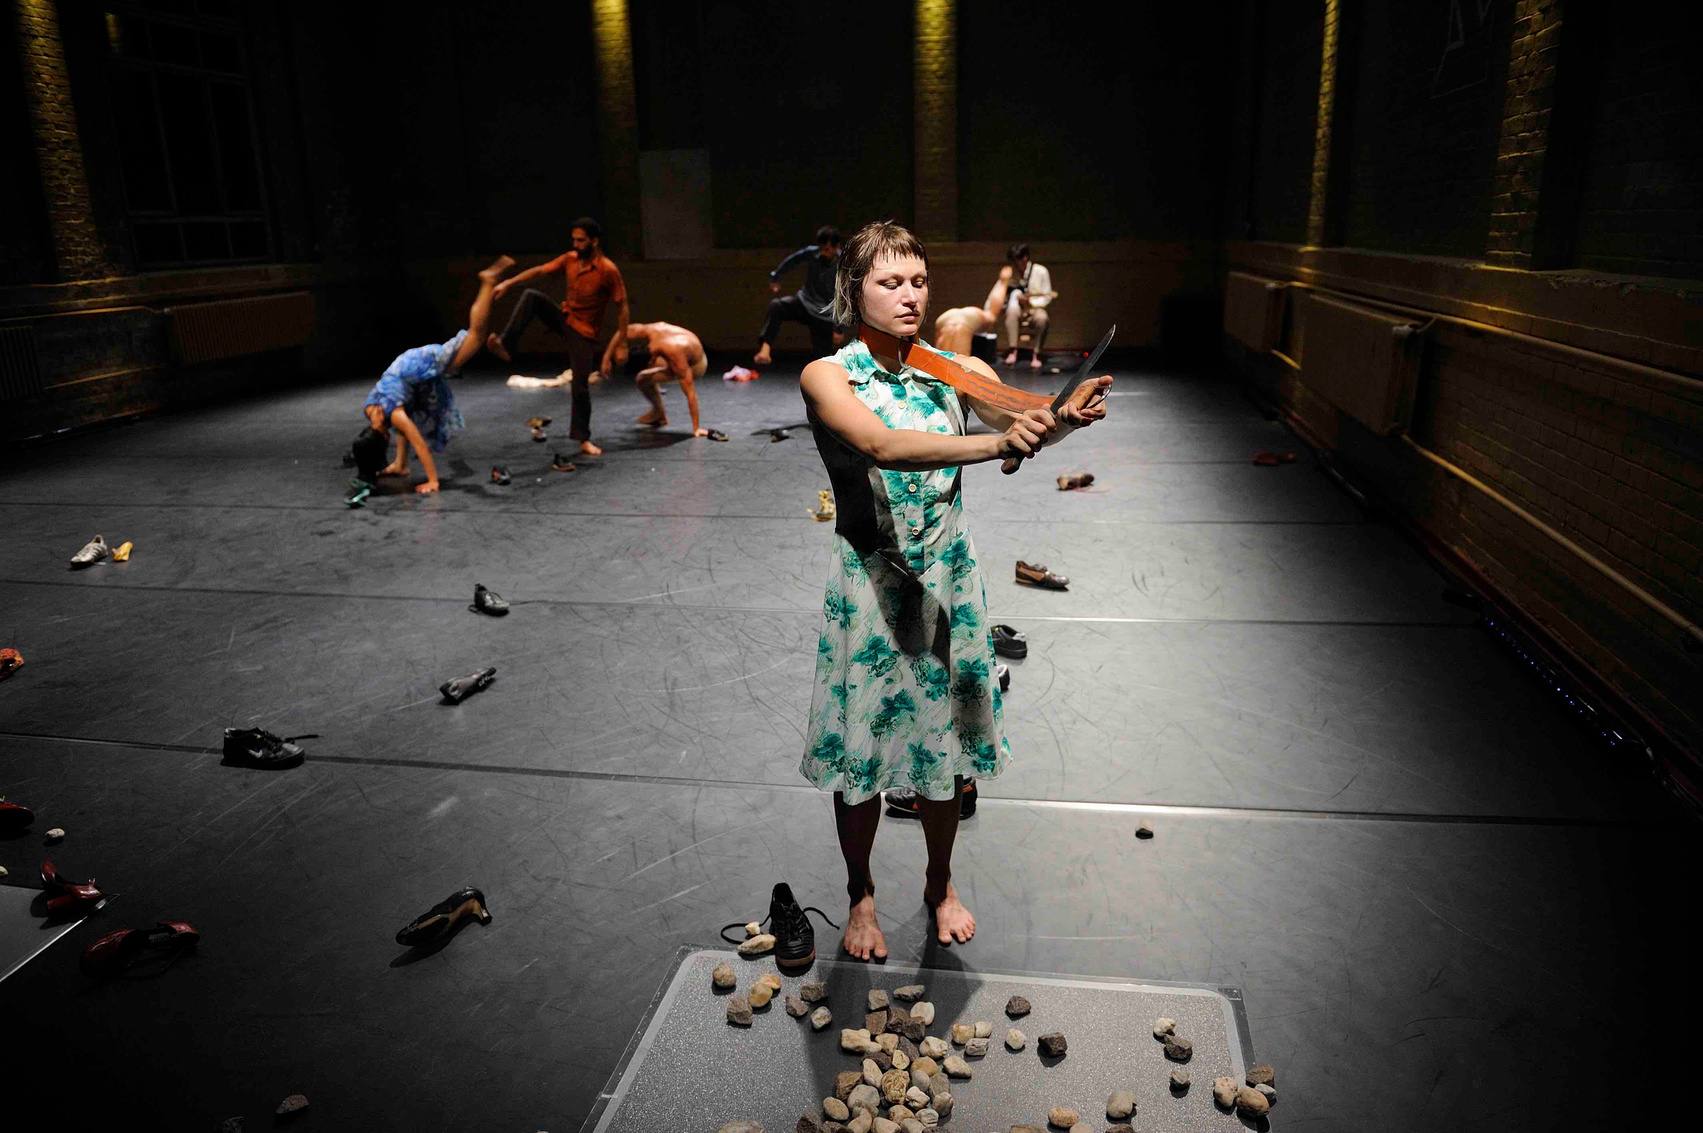 a person in a green dress is standing in front of a group of dancers and she is holding a knife